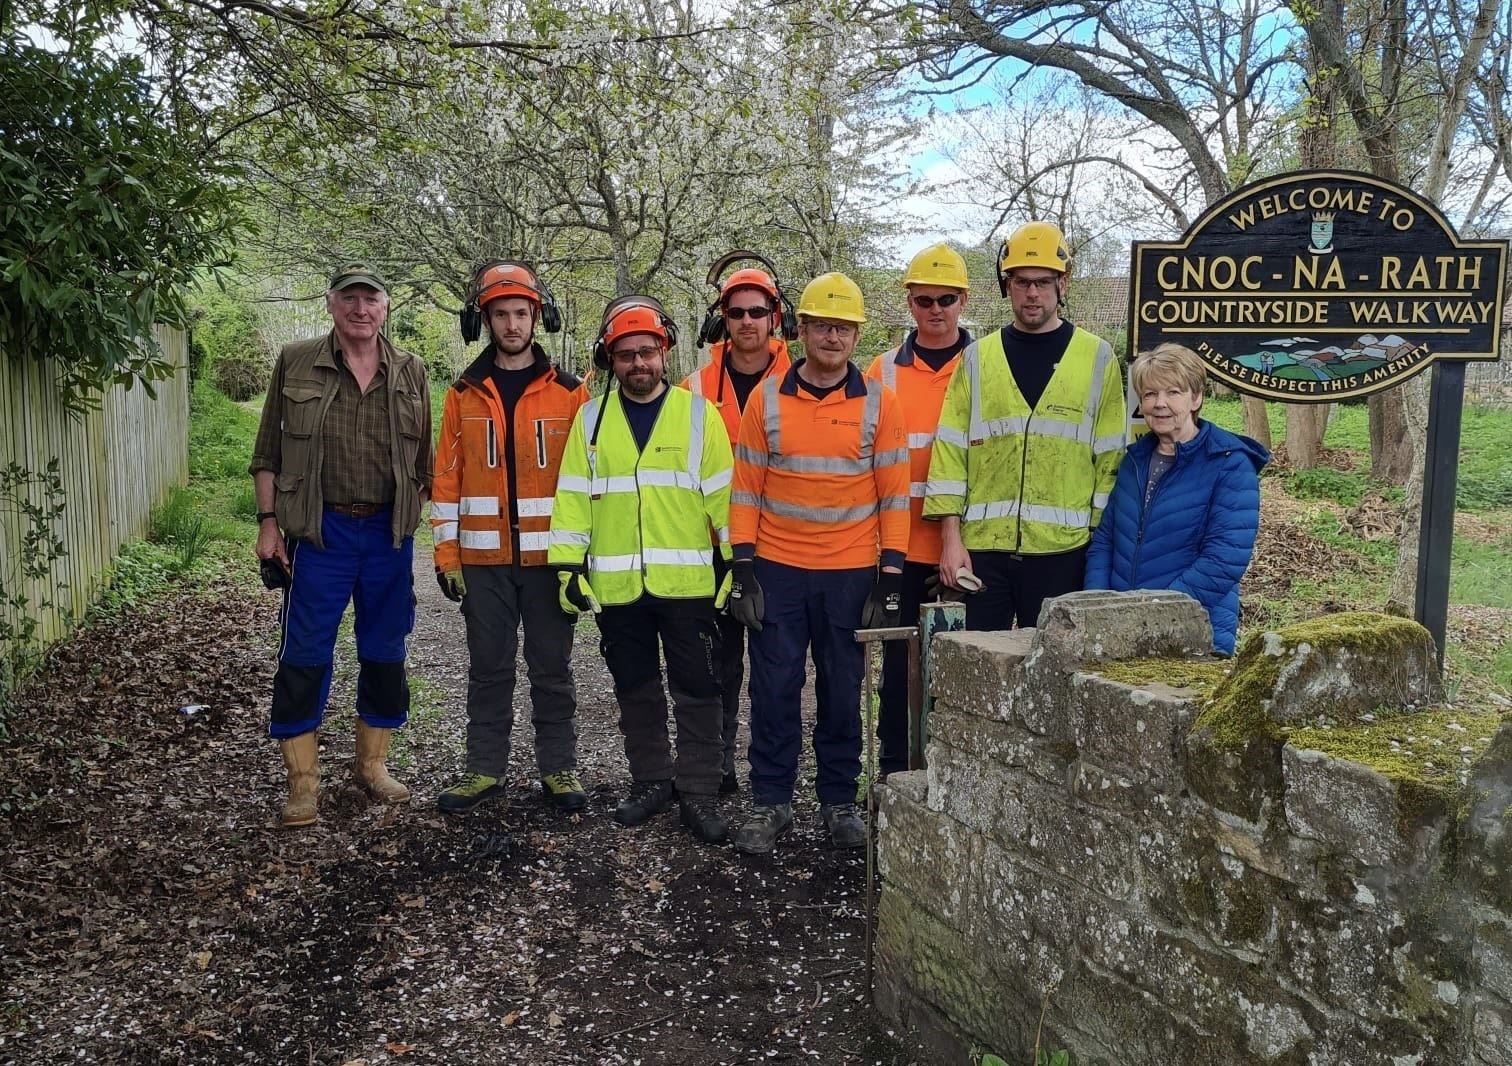 Volunteers from SSEN Distribution's Inverness depot lend a helping hand to Beauly Community Council in making Cnoc Walkway more accessible and safer.